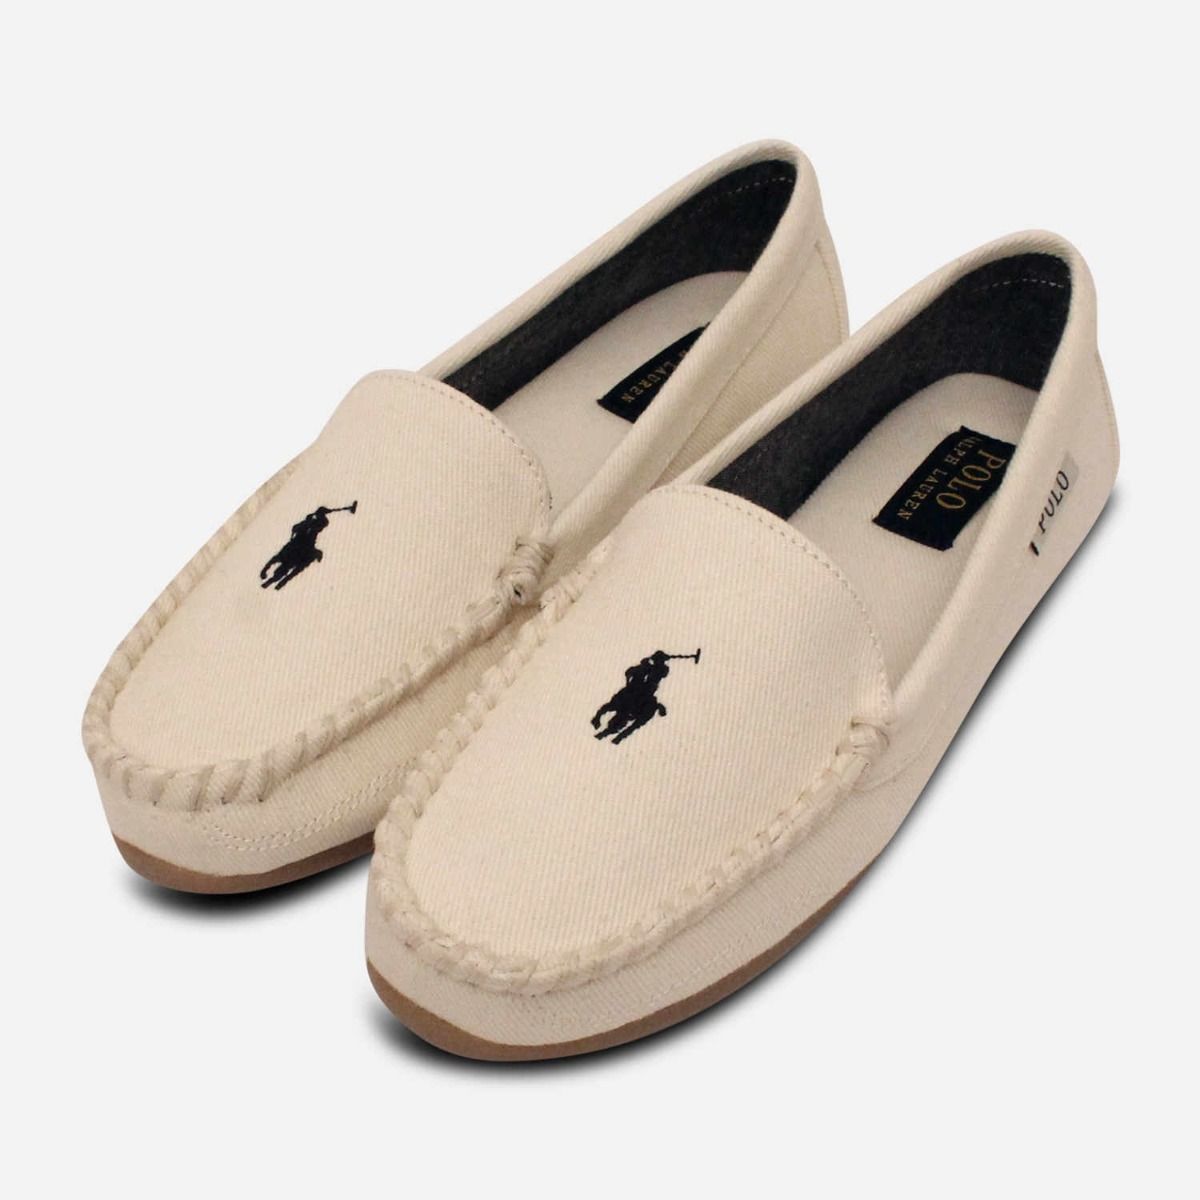 Printed US Polo Slippers, Rubber